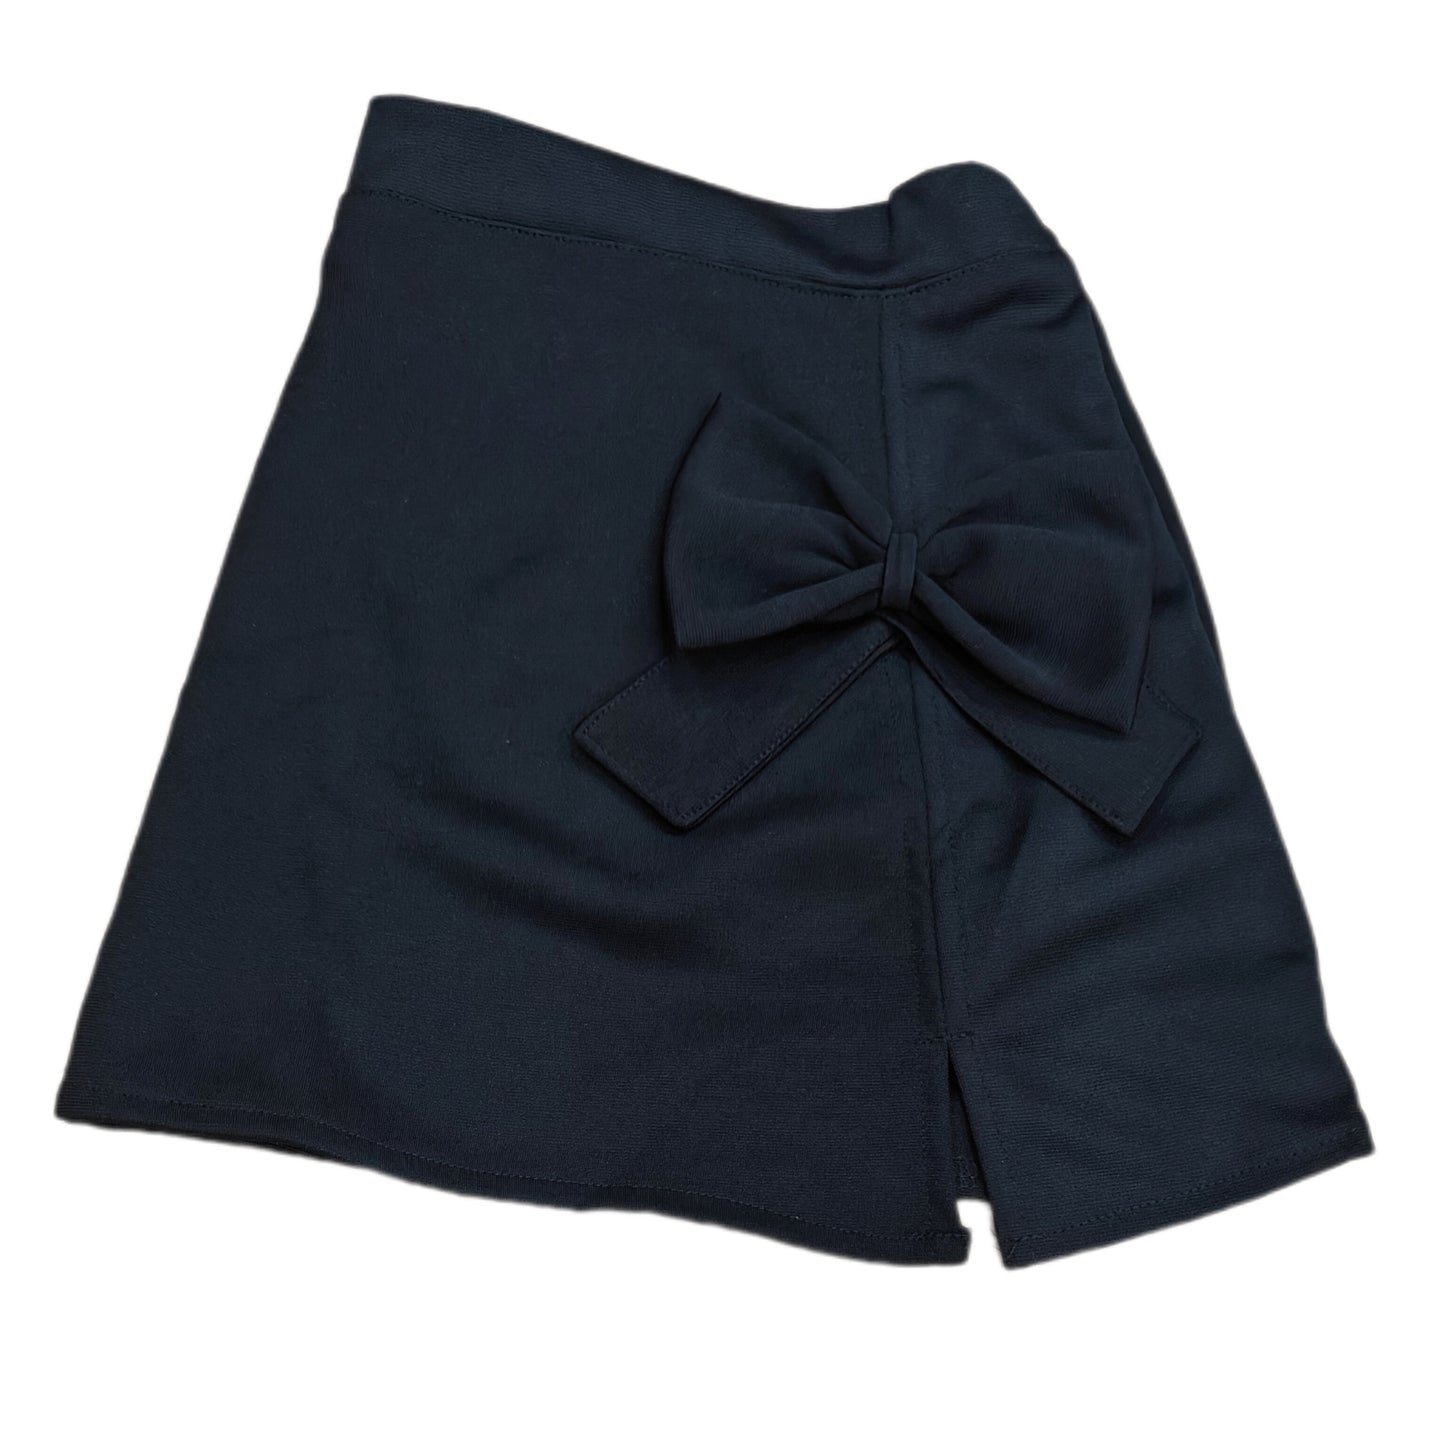 Girls Pencil Skirt with a Bow